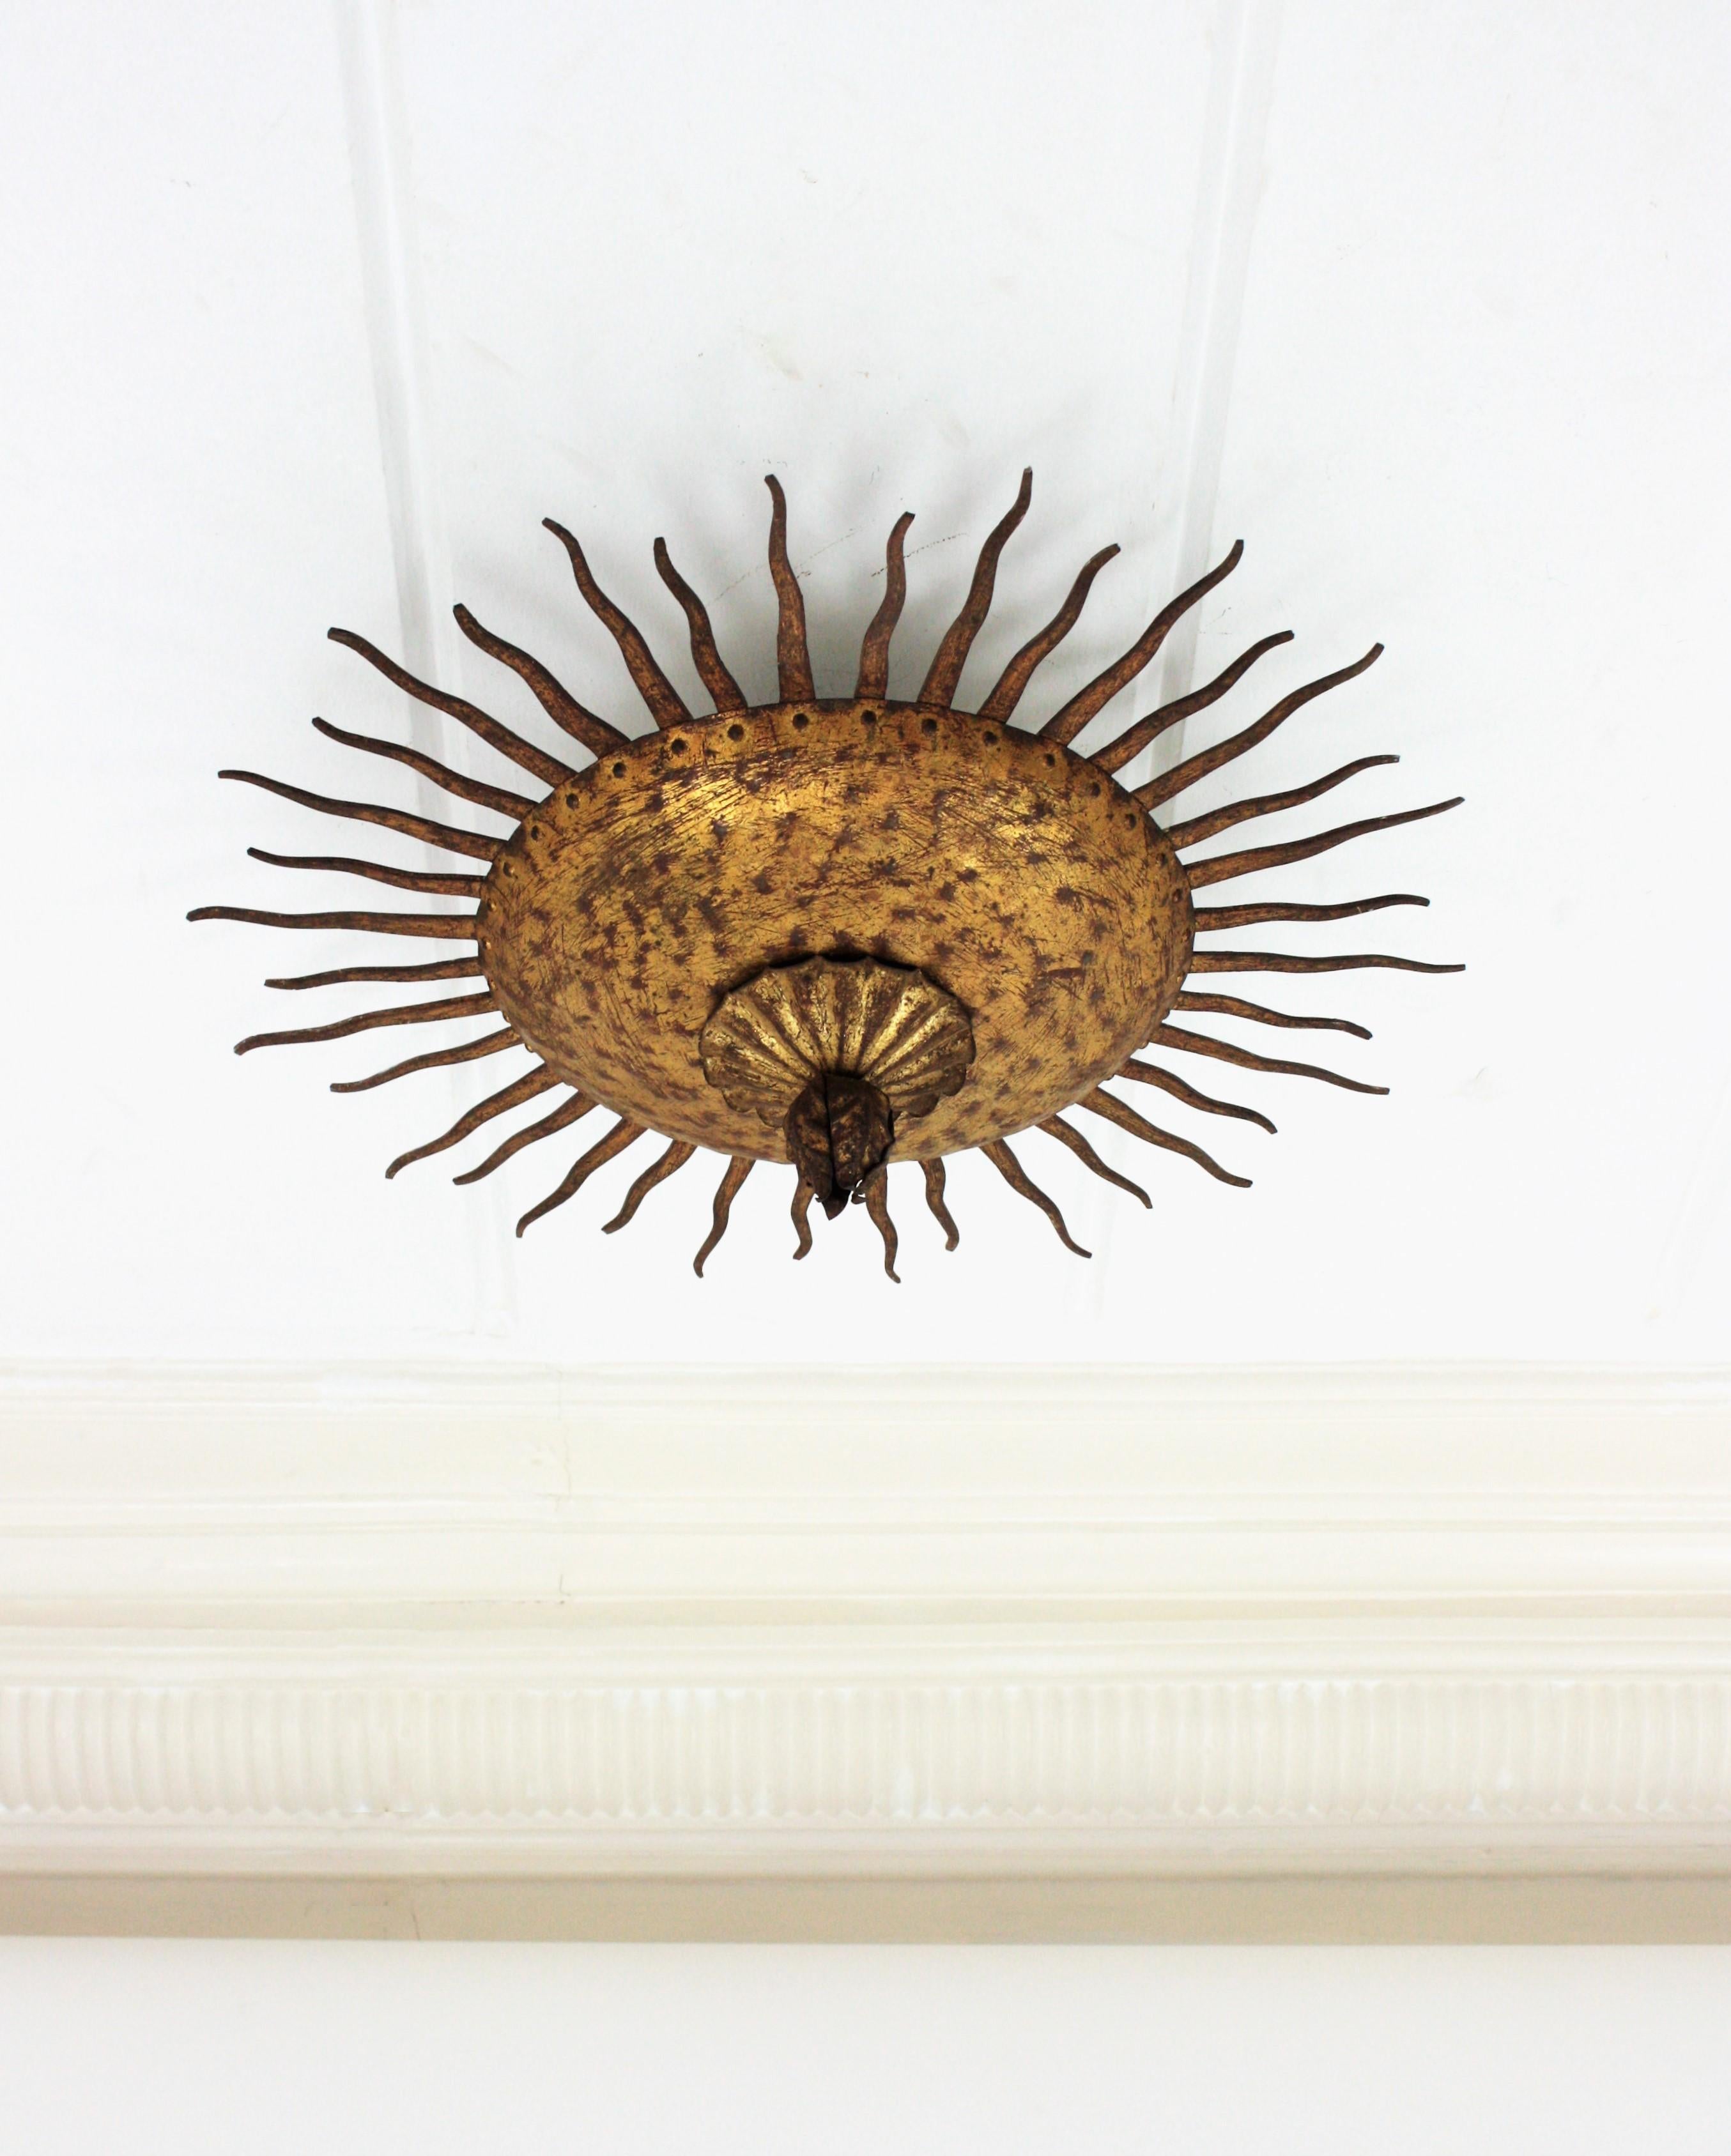 French Sunburst Curly Ceiling Light Fixture / Chandelier in Gilt Iron